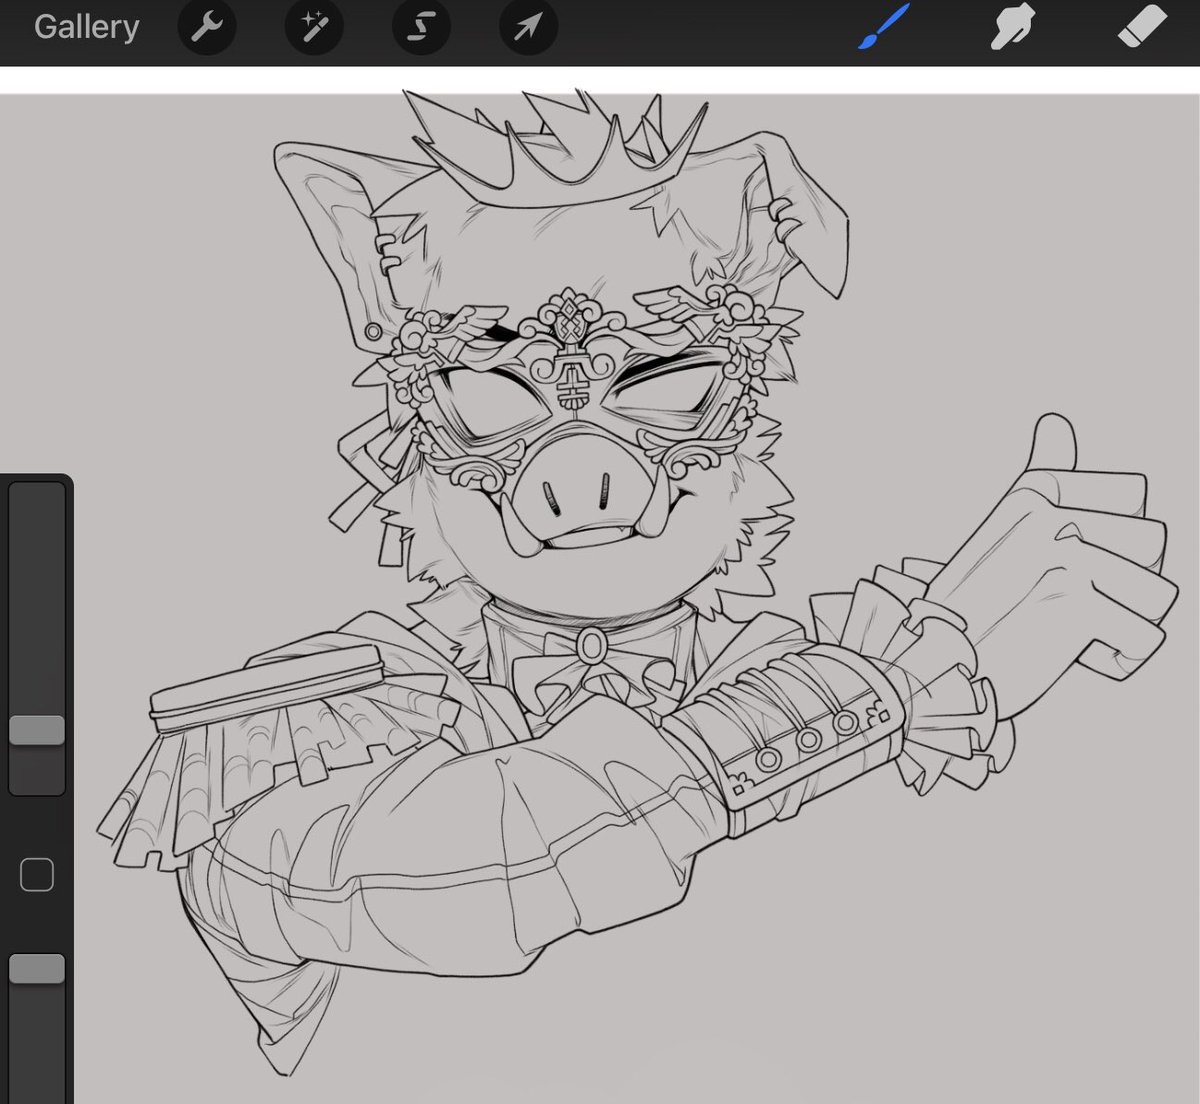 this lineart MAD CRISPY dawg 